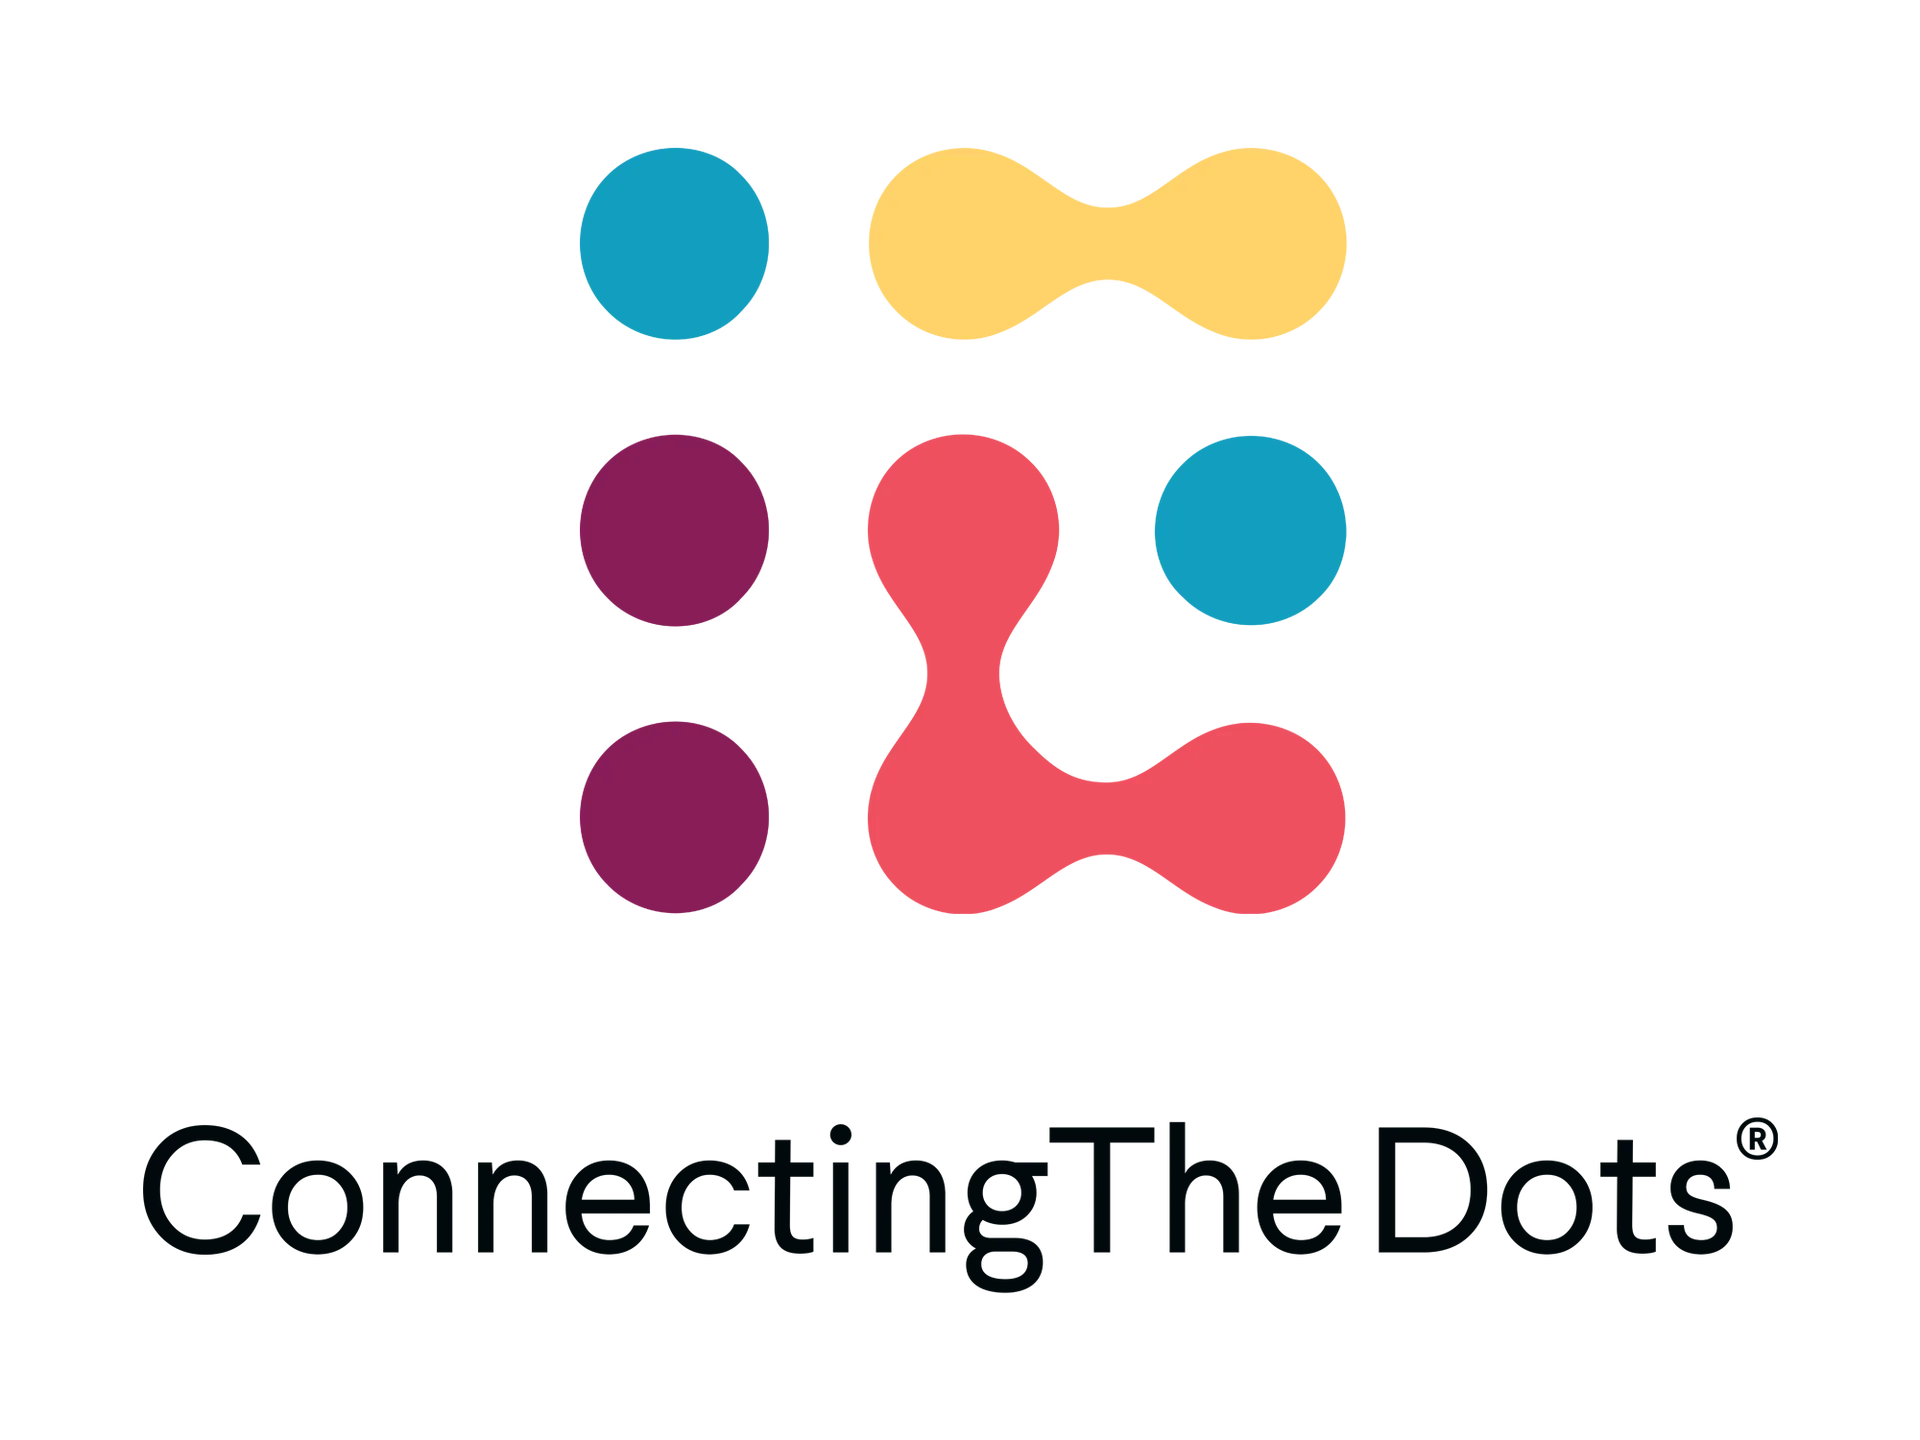 ConnectingTheDots